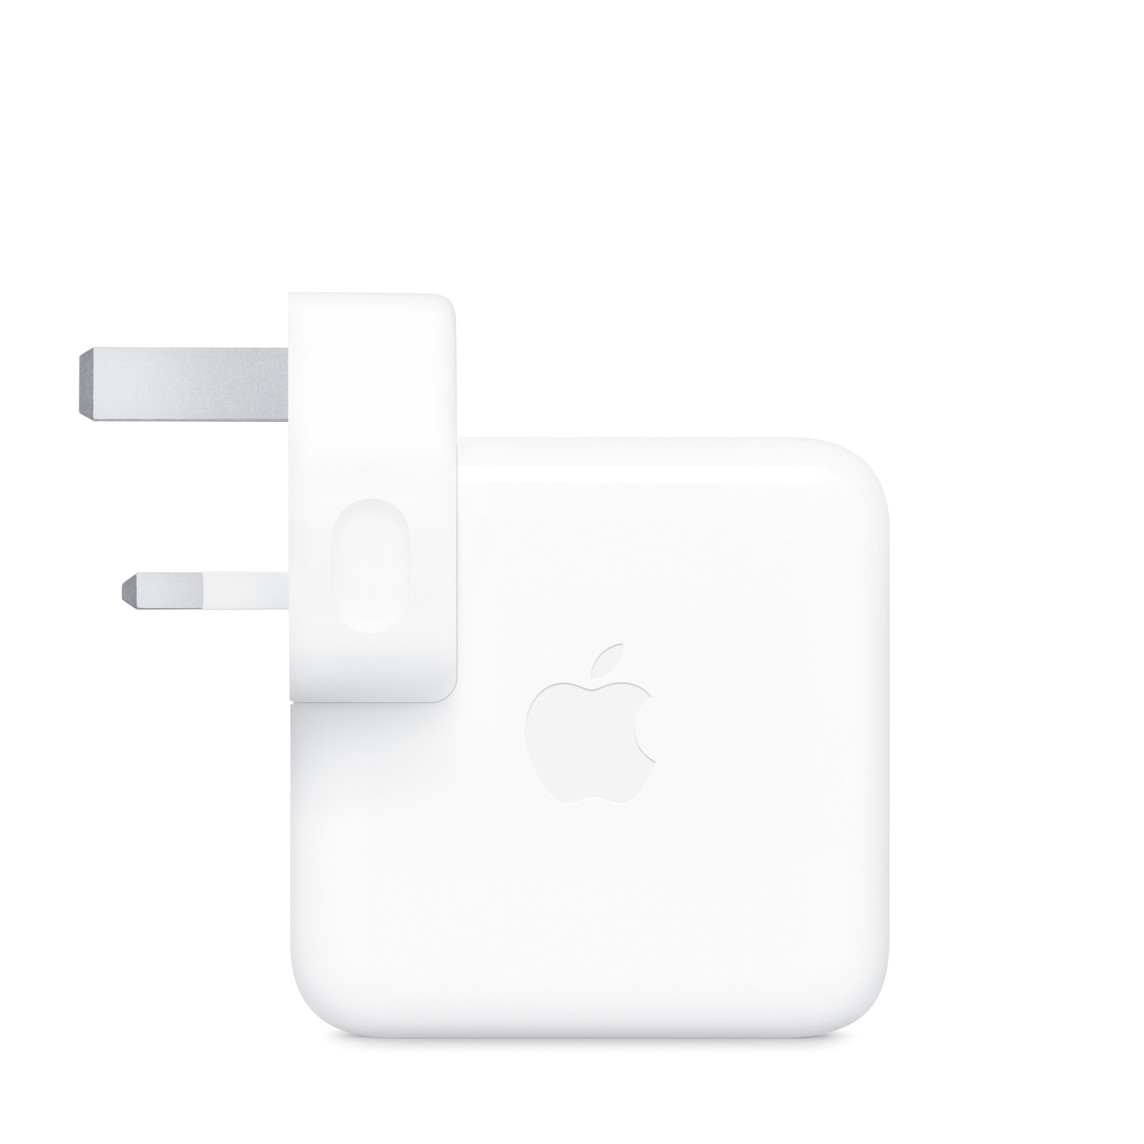 70W USB-C Power Adapter, white, plug pins on one side, USB-C port on opposite side